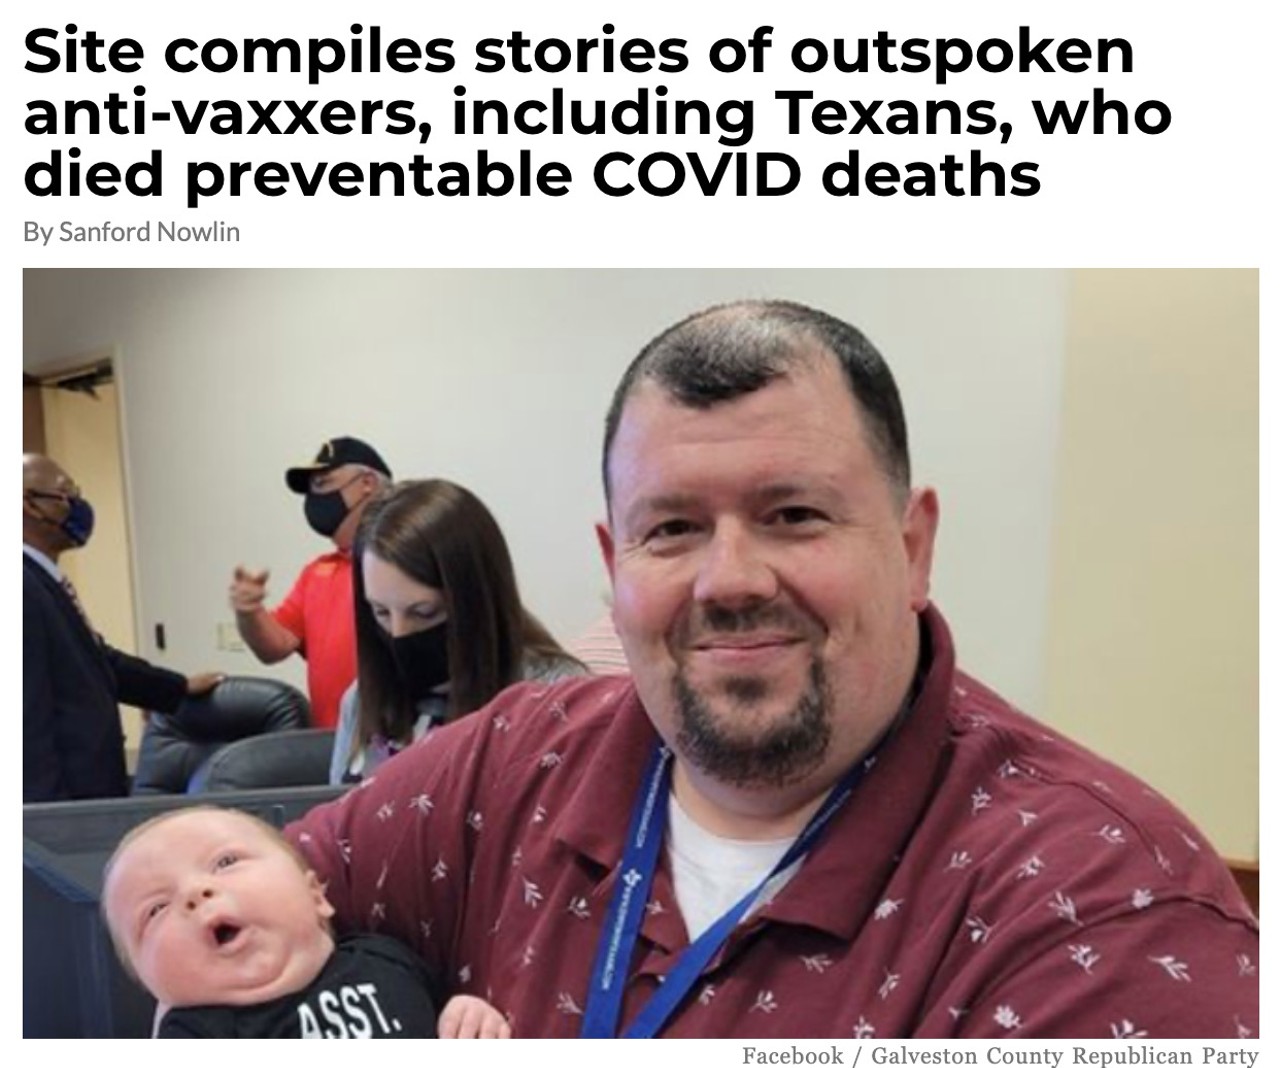 18. Site compiles stories of outspoken anti-vaxxers, including Texans, who died preventable COVID deaths 